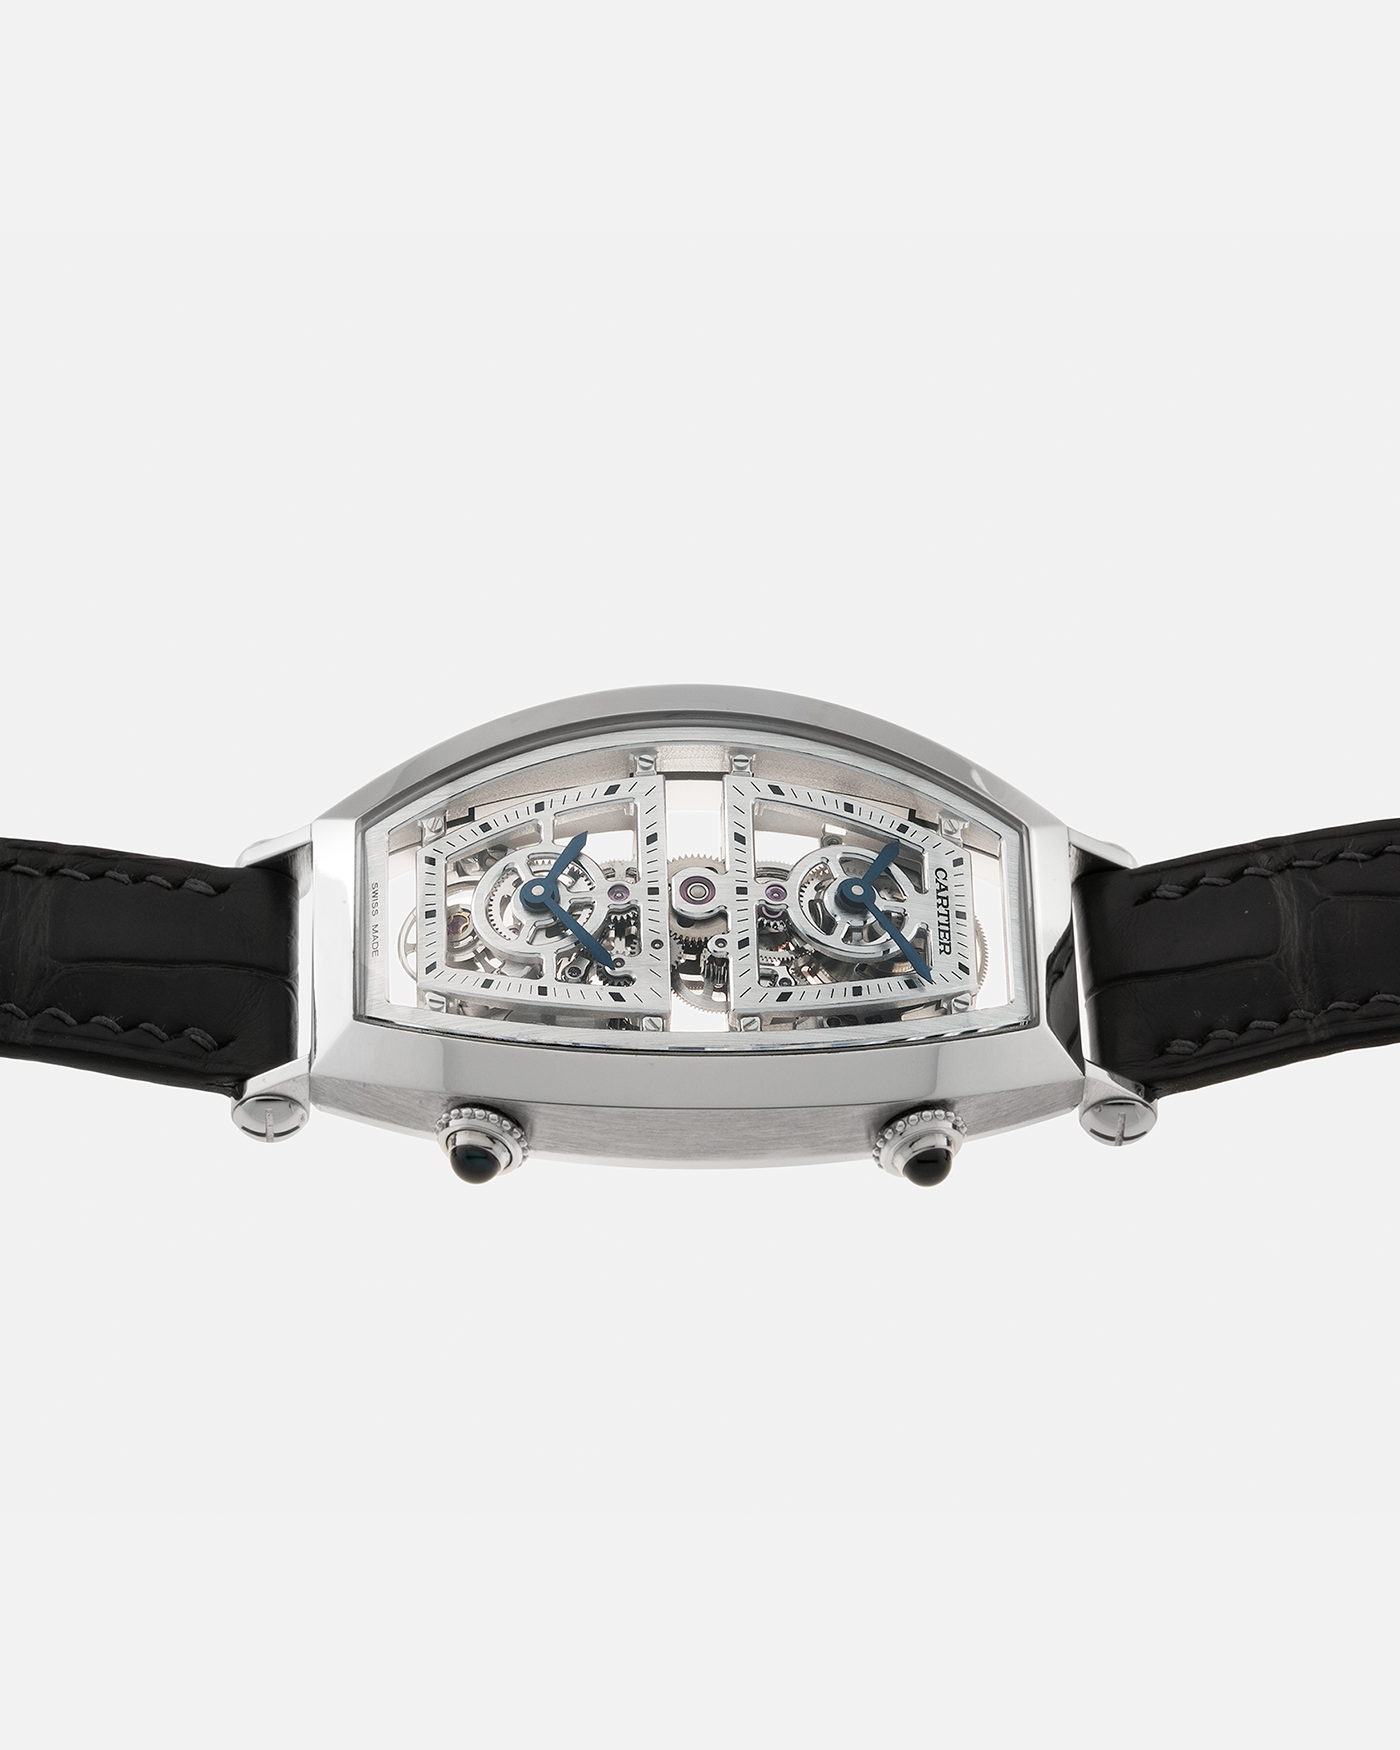 Brand: Cartier Year: 2022 Model: Privé Tonneau Skeleton Dual Time, Limited Edition of 100 pieces only Reference: CRWHTN0006 Material: Platinum 950 Case, 18-carat White Gold Deployant Clasp Movement: Cartier Cal. 9919 MC, Manual-Winding Case Dimensions: 52.4mm x 29.4mm Strap: Cartier Navy Alligator Leather Strap with Signed 18-carat White Gold Deployant Clasp, with two additional Cartier Black and Blue Alligator Leather Straps